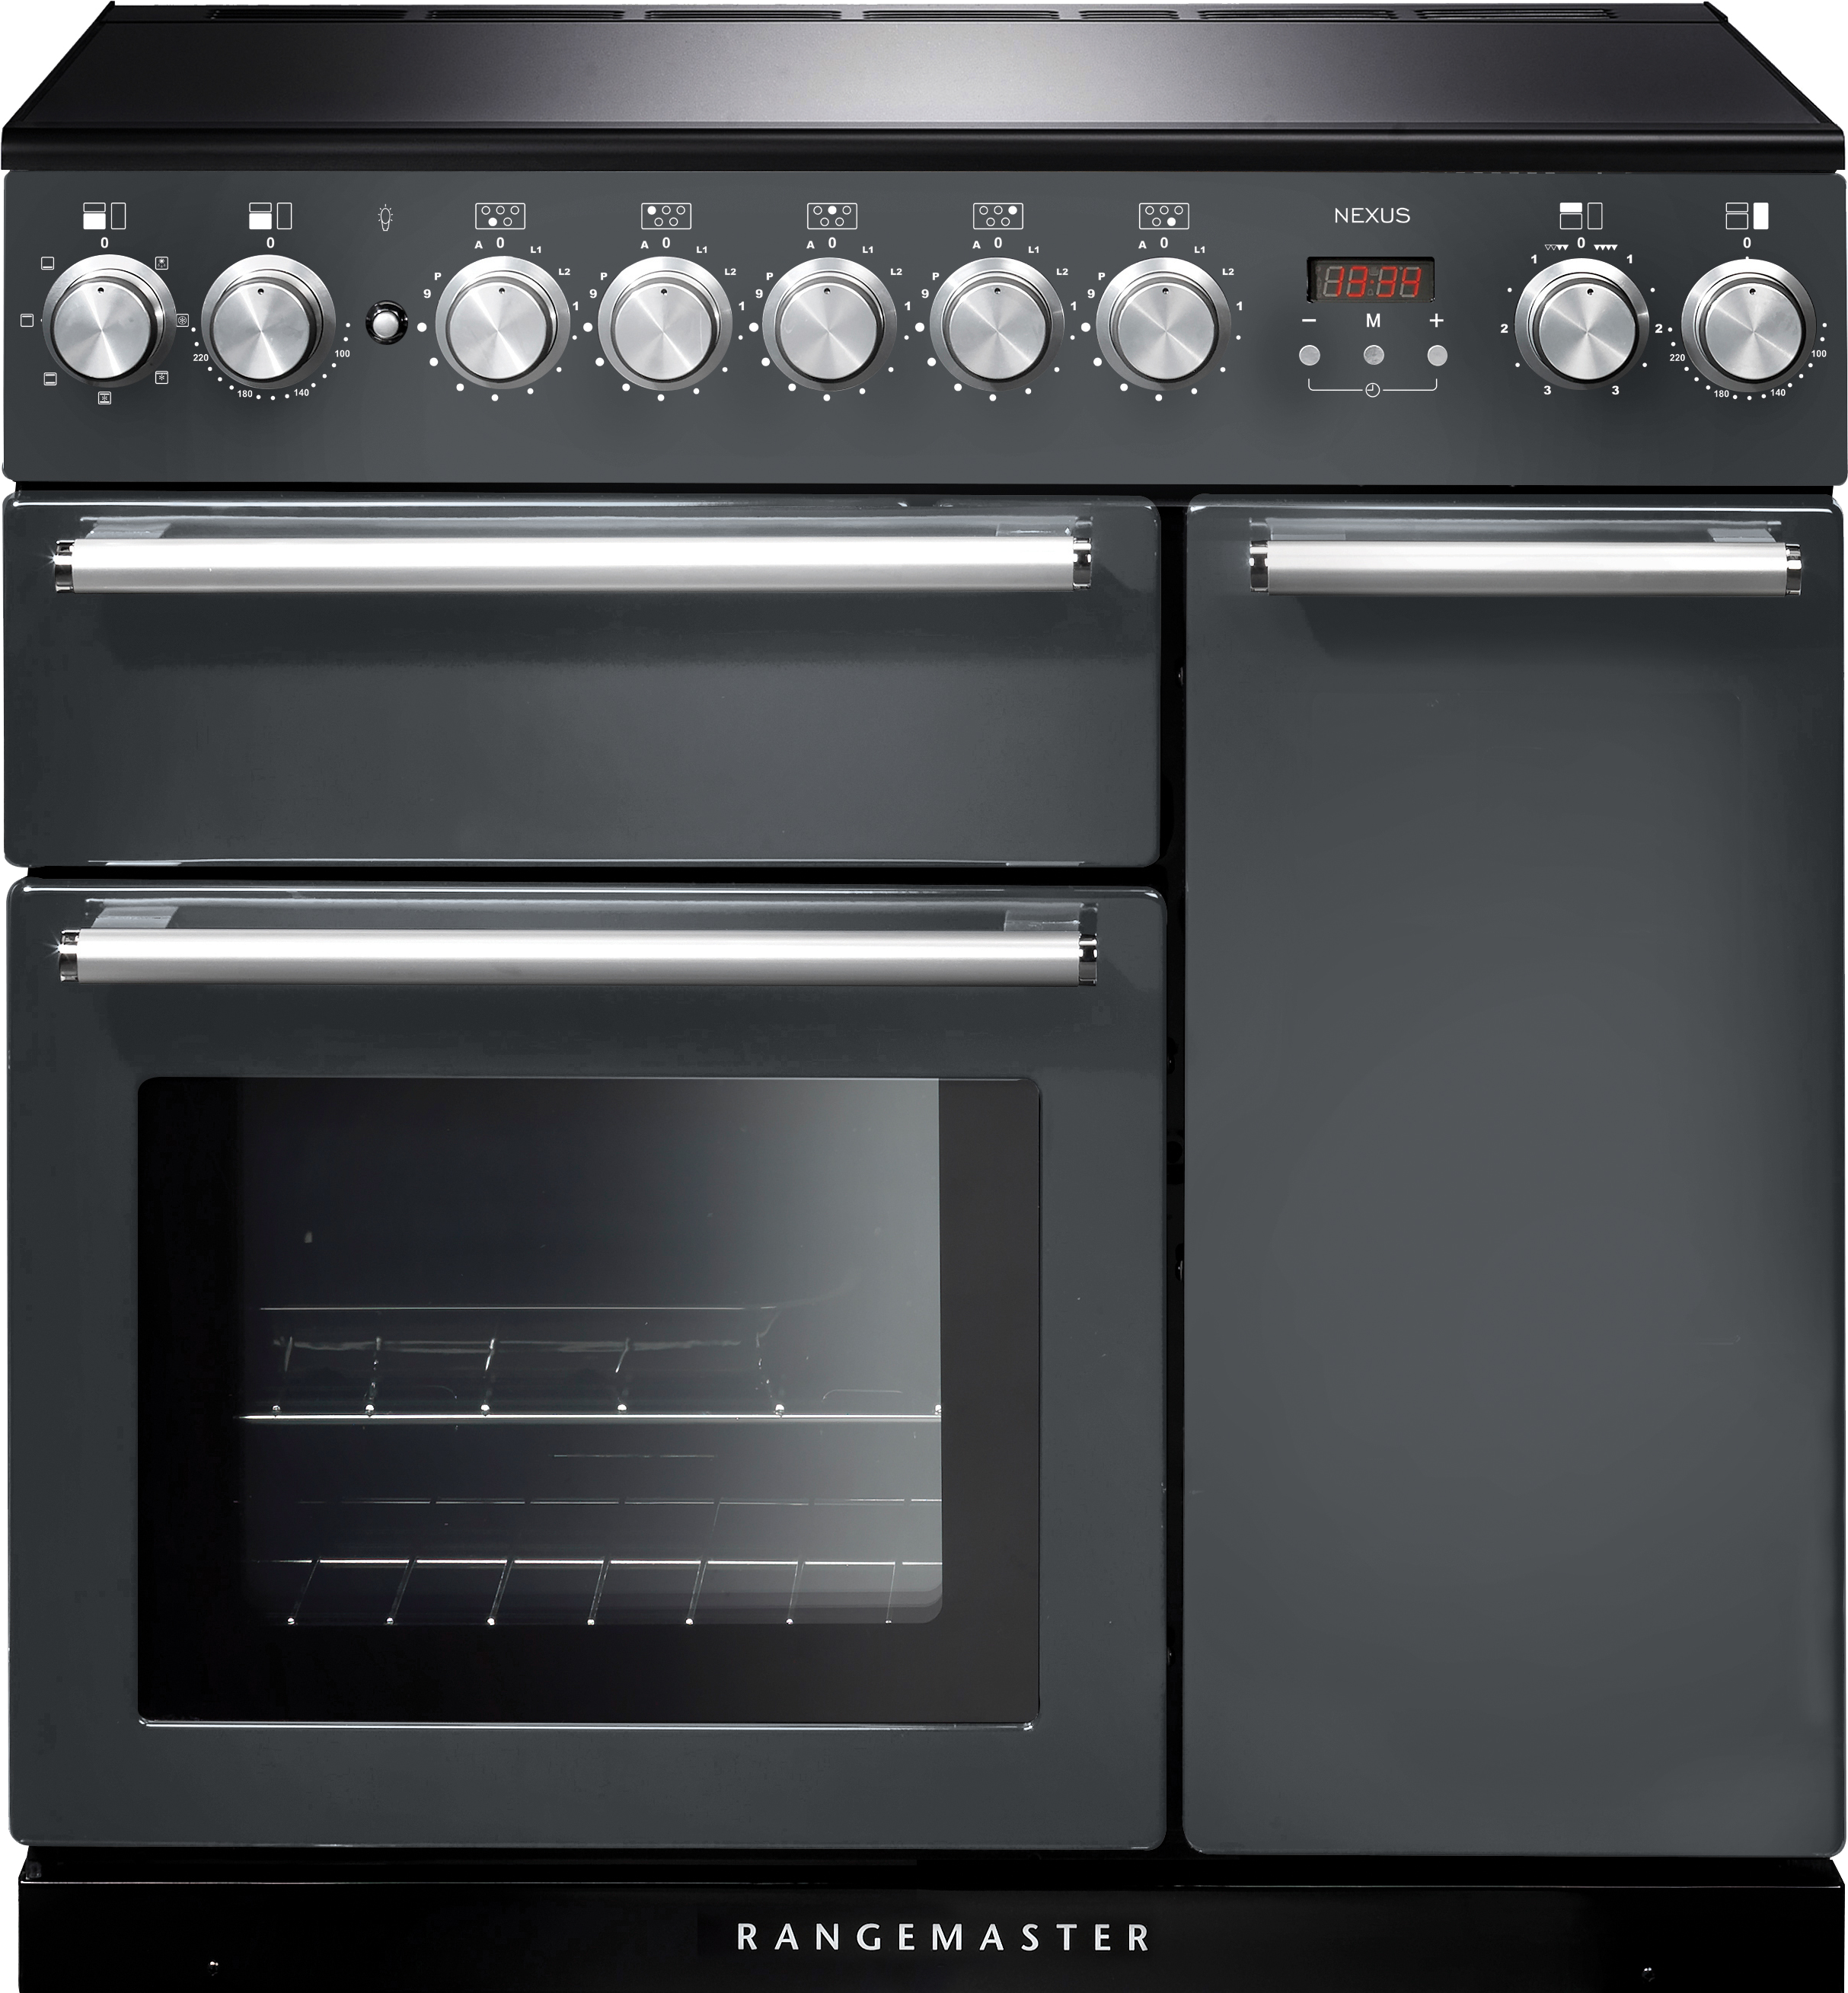 Rangemaster Nexus NEX90EISL/C 90cm Electric Range Cooker with Induction Hob - Slate - A/A Rated, Graphite